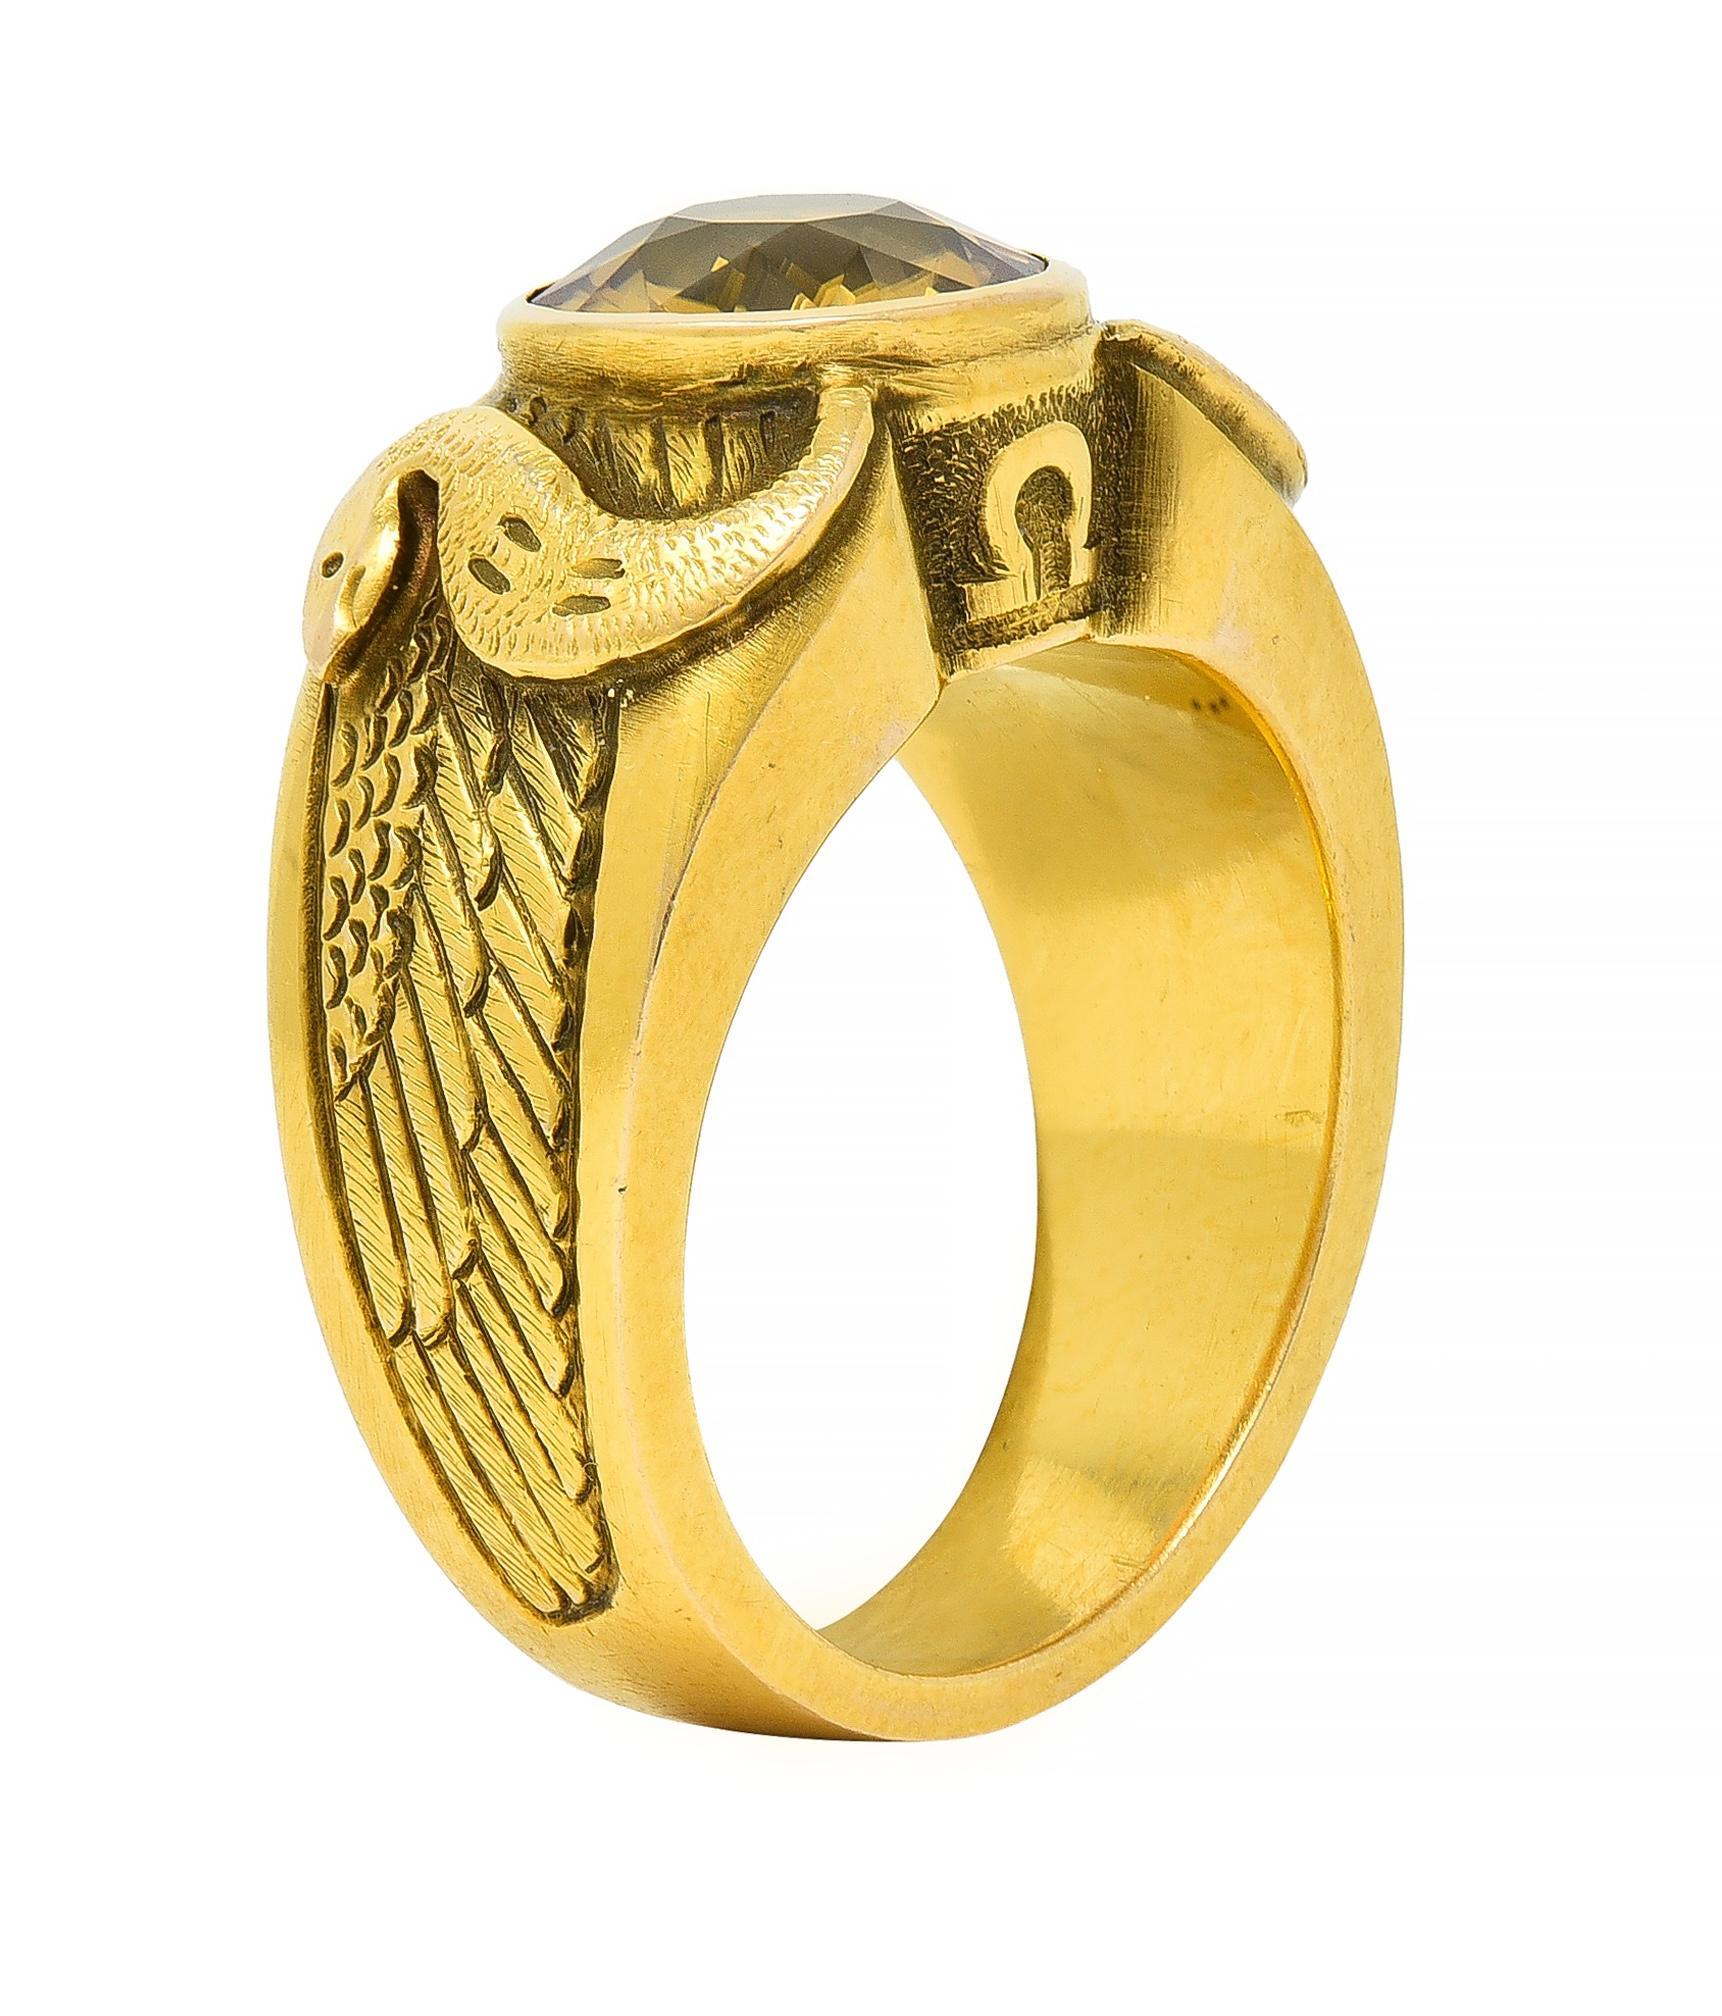 Centering a cushion cut zircon weighing approximately 4.57 carats - transparent medium brownish yellow 
Bezel set and flanked by engraved wing motif sweeping down shoulders 
With raised curling serpents and accented by omega symbol profiles 
Stamped